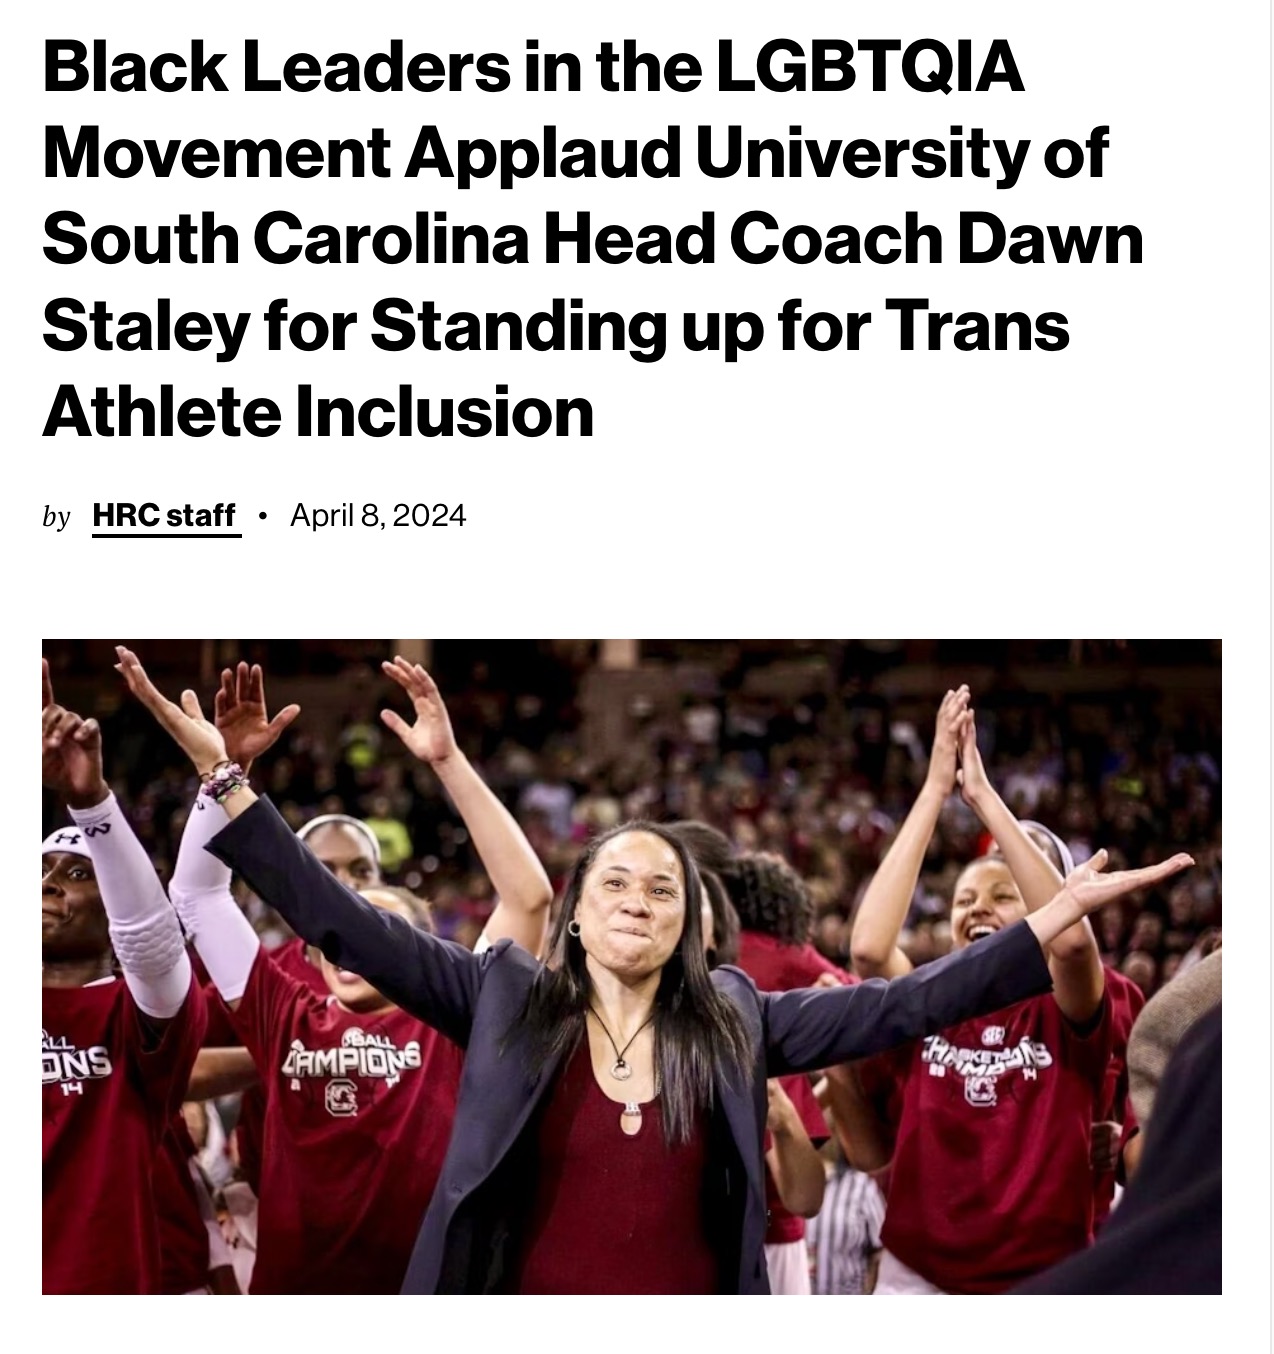 Black Leaders in the LGBTQIA Movement Applaud University of South Carolina Head Coach Dawn Staley for Standing up for Trans Athlete Inclusion